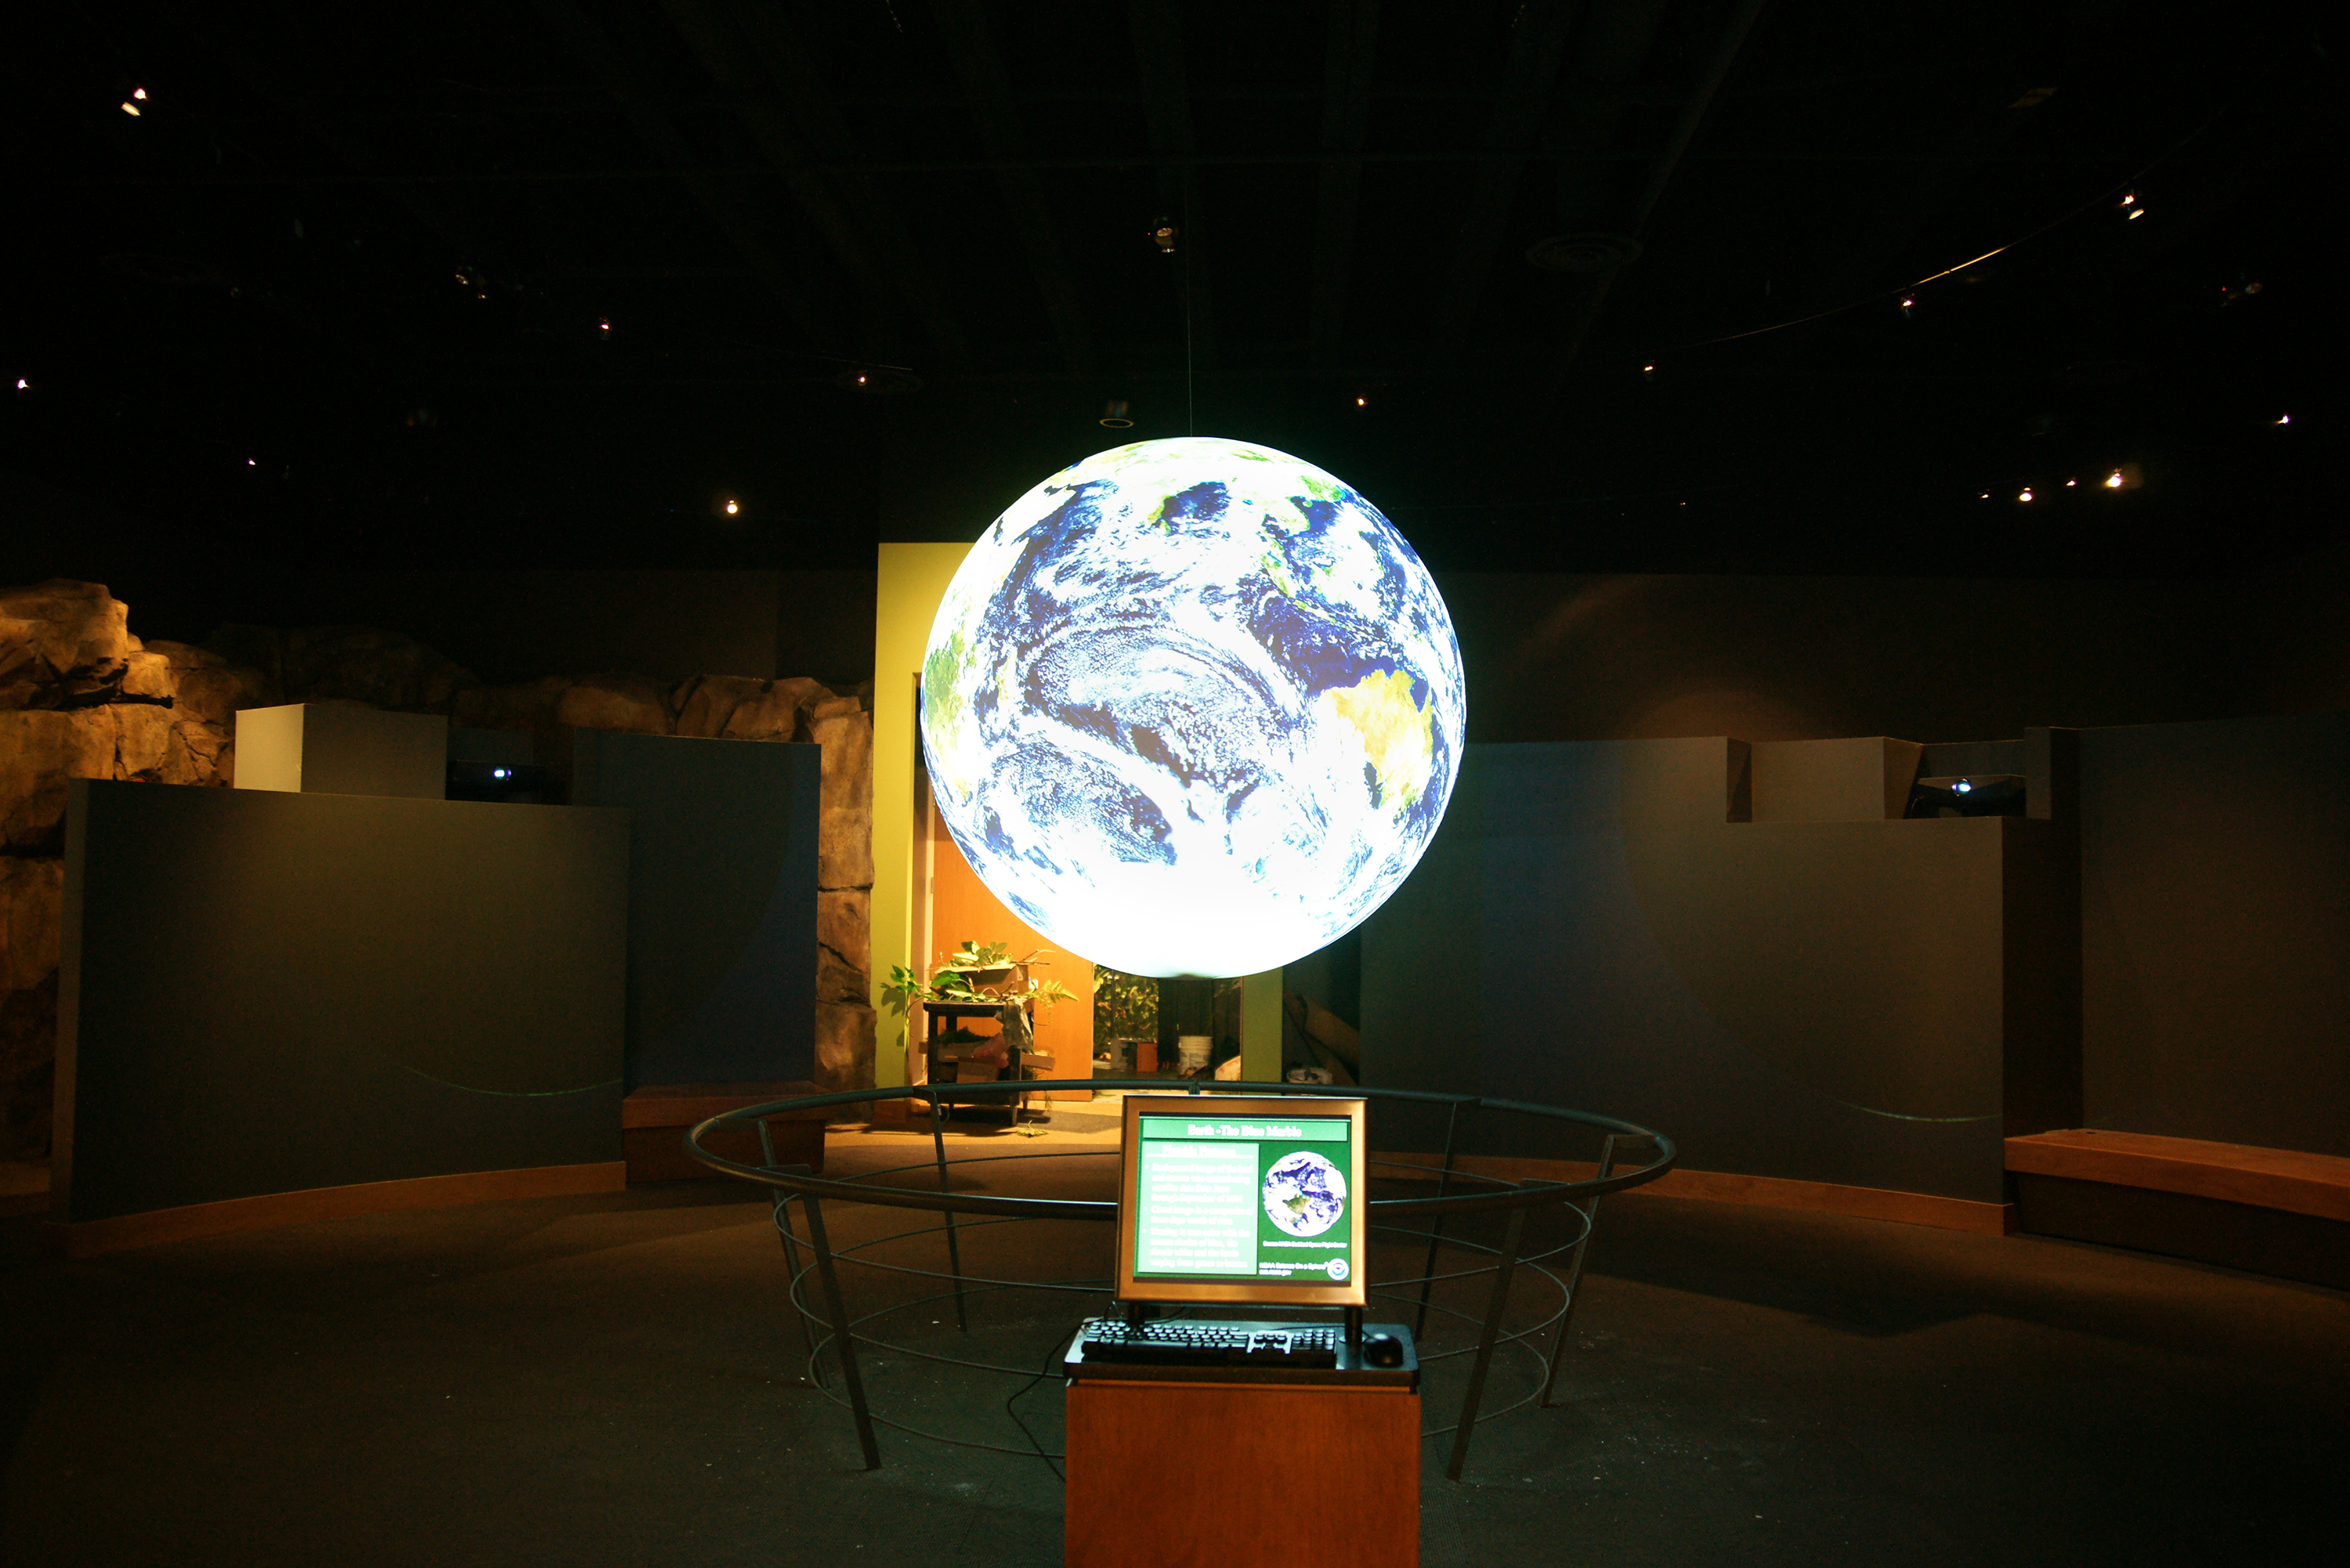 Science On a Sphere displays satellite imagery of Earth in an empty room. In front of the Sphere sits a computer monitor, keyboard, and mouse